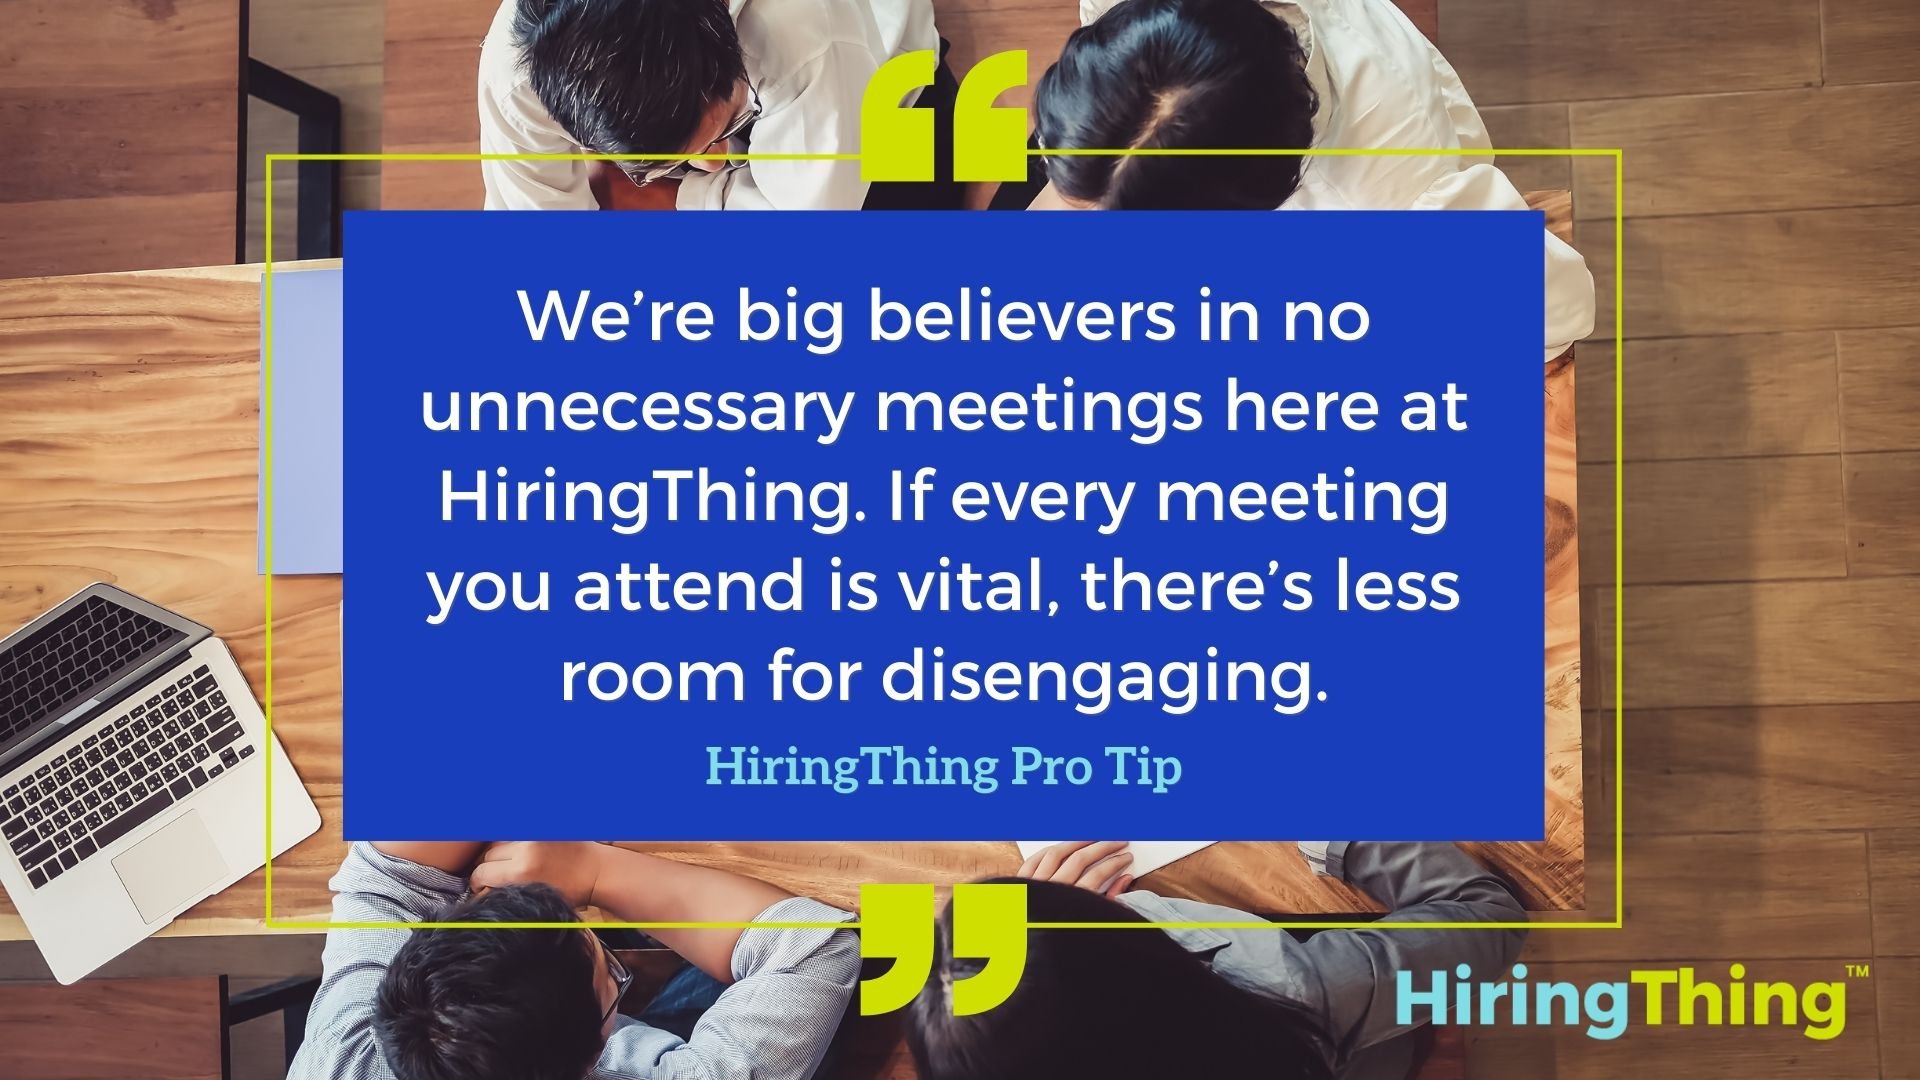 HiringThing Pro Tip: We’re big believers in no unnecessary meetings here at HiringThing. If every meeting you attend is vital, there’s less room for disengaging.